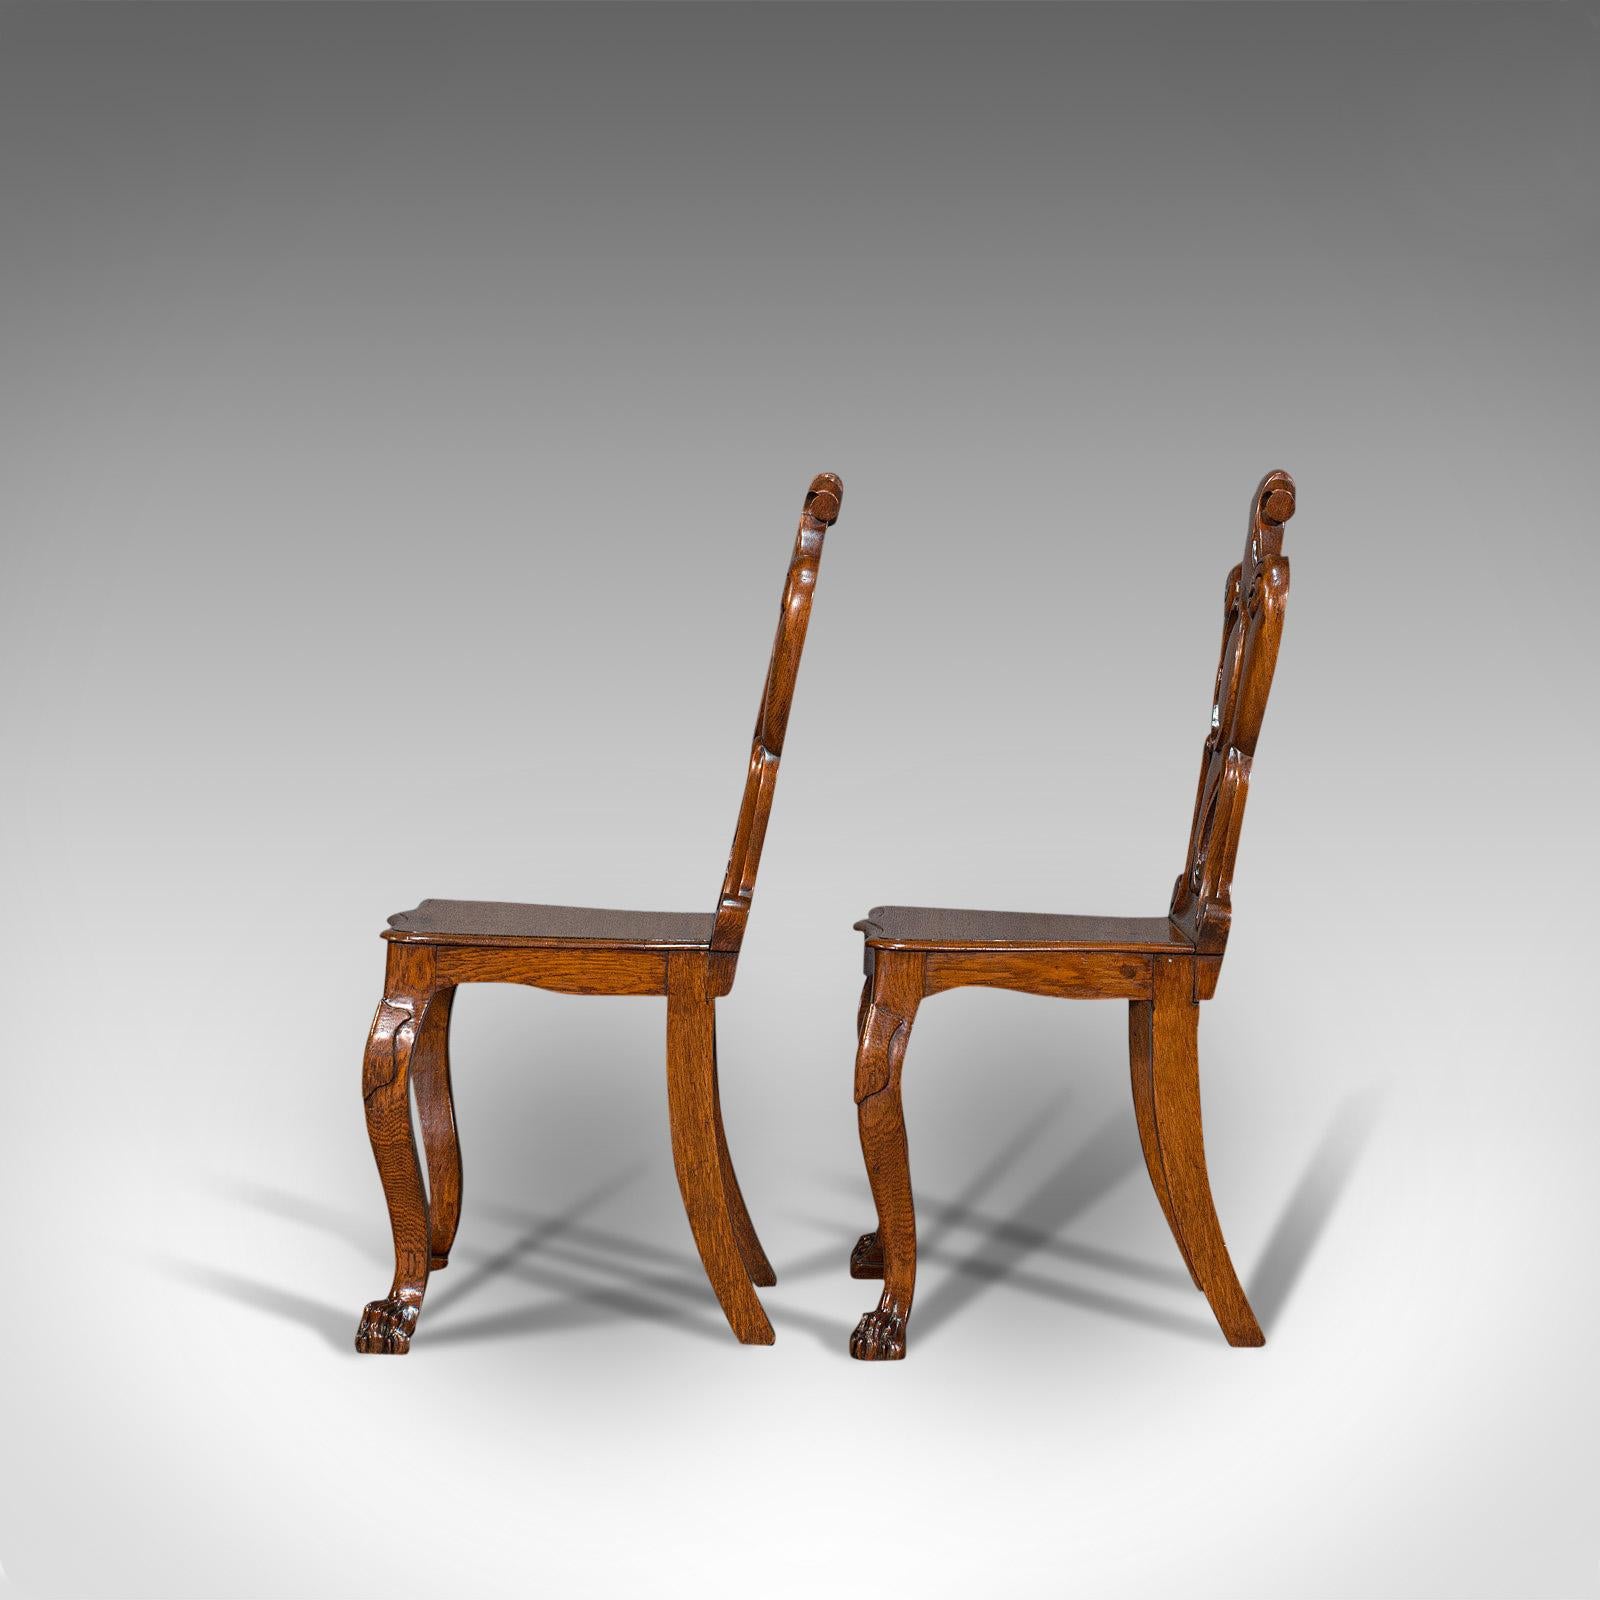 Pair of Antique Shield Back Chairs, Scottish, Oak Hall Seat Victorian circa 1880 For Sale 1